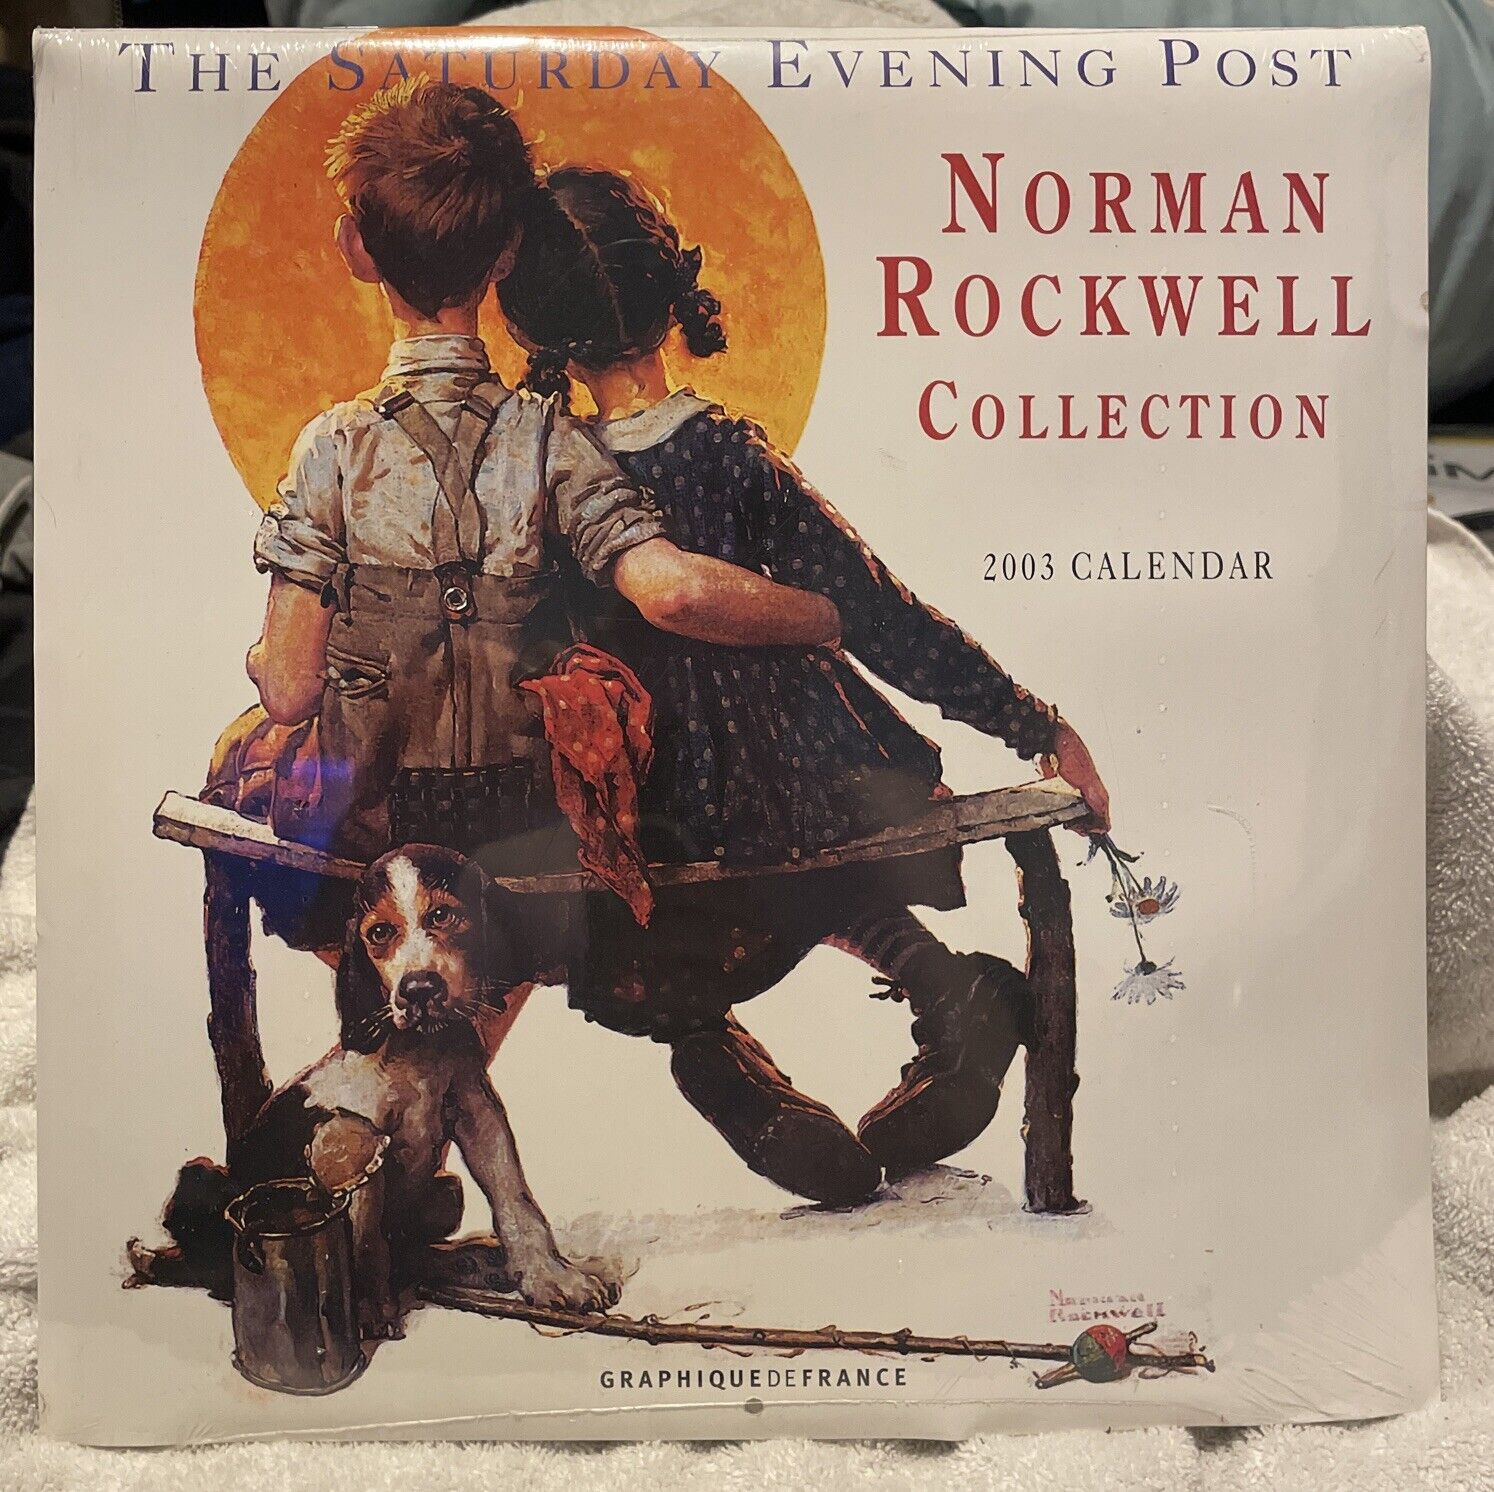 Factory Sealed Norman Rockwell saturday evening post collection 2003 Calendar